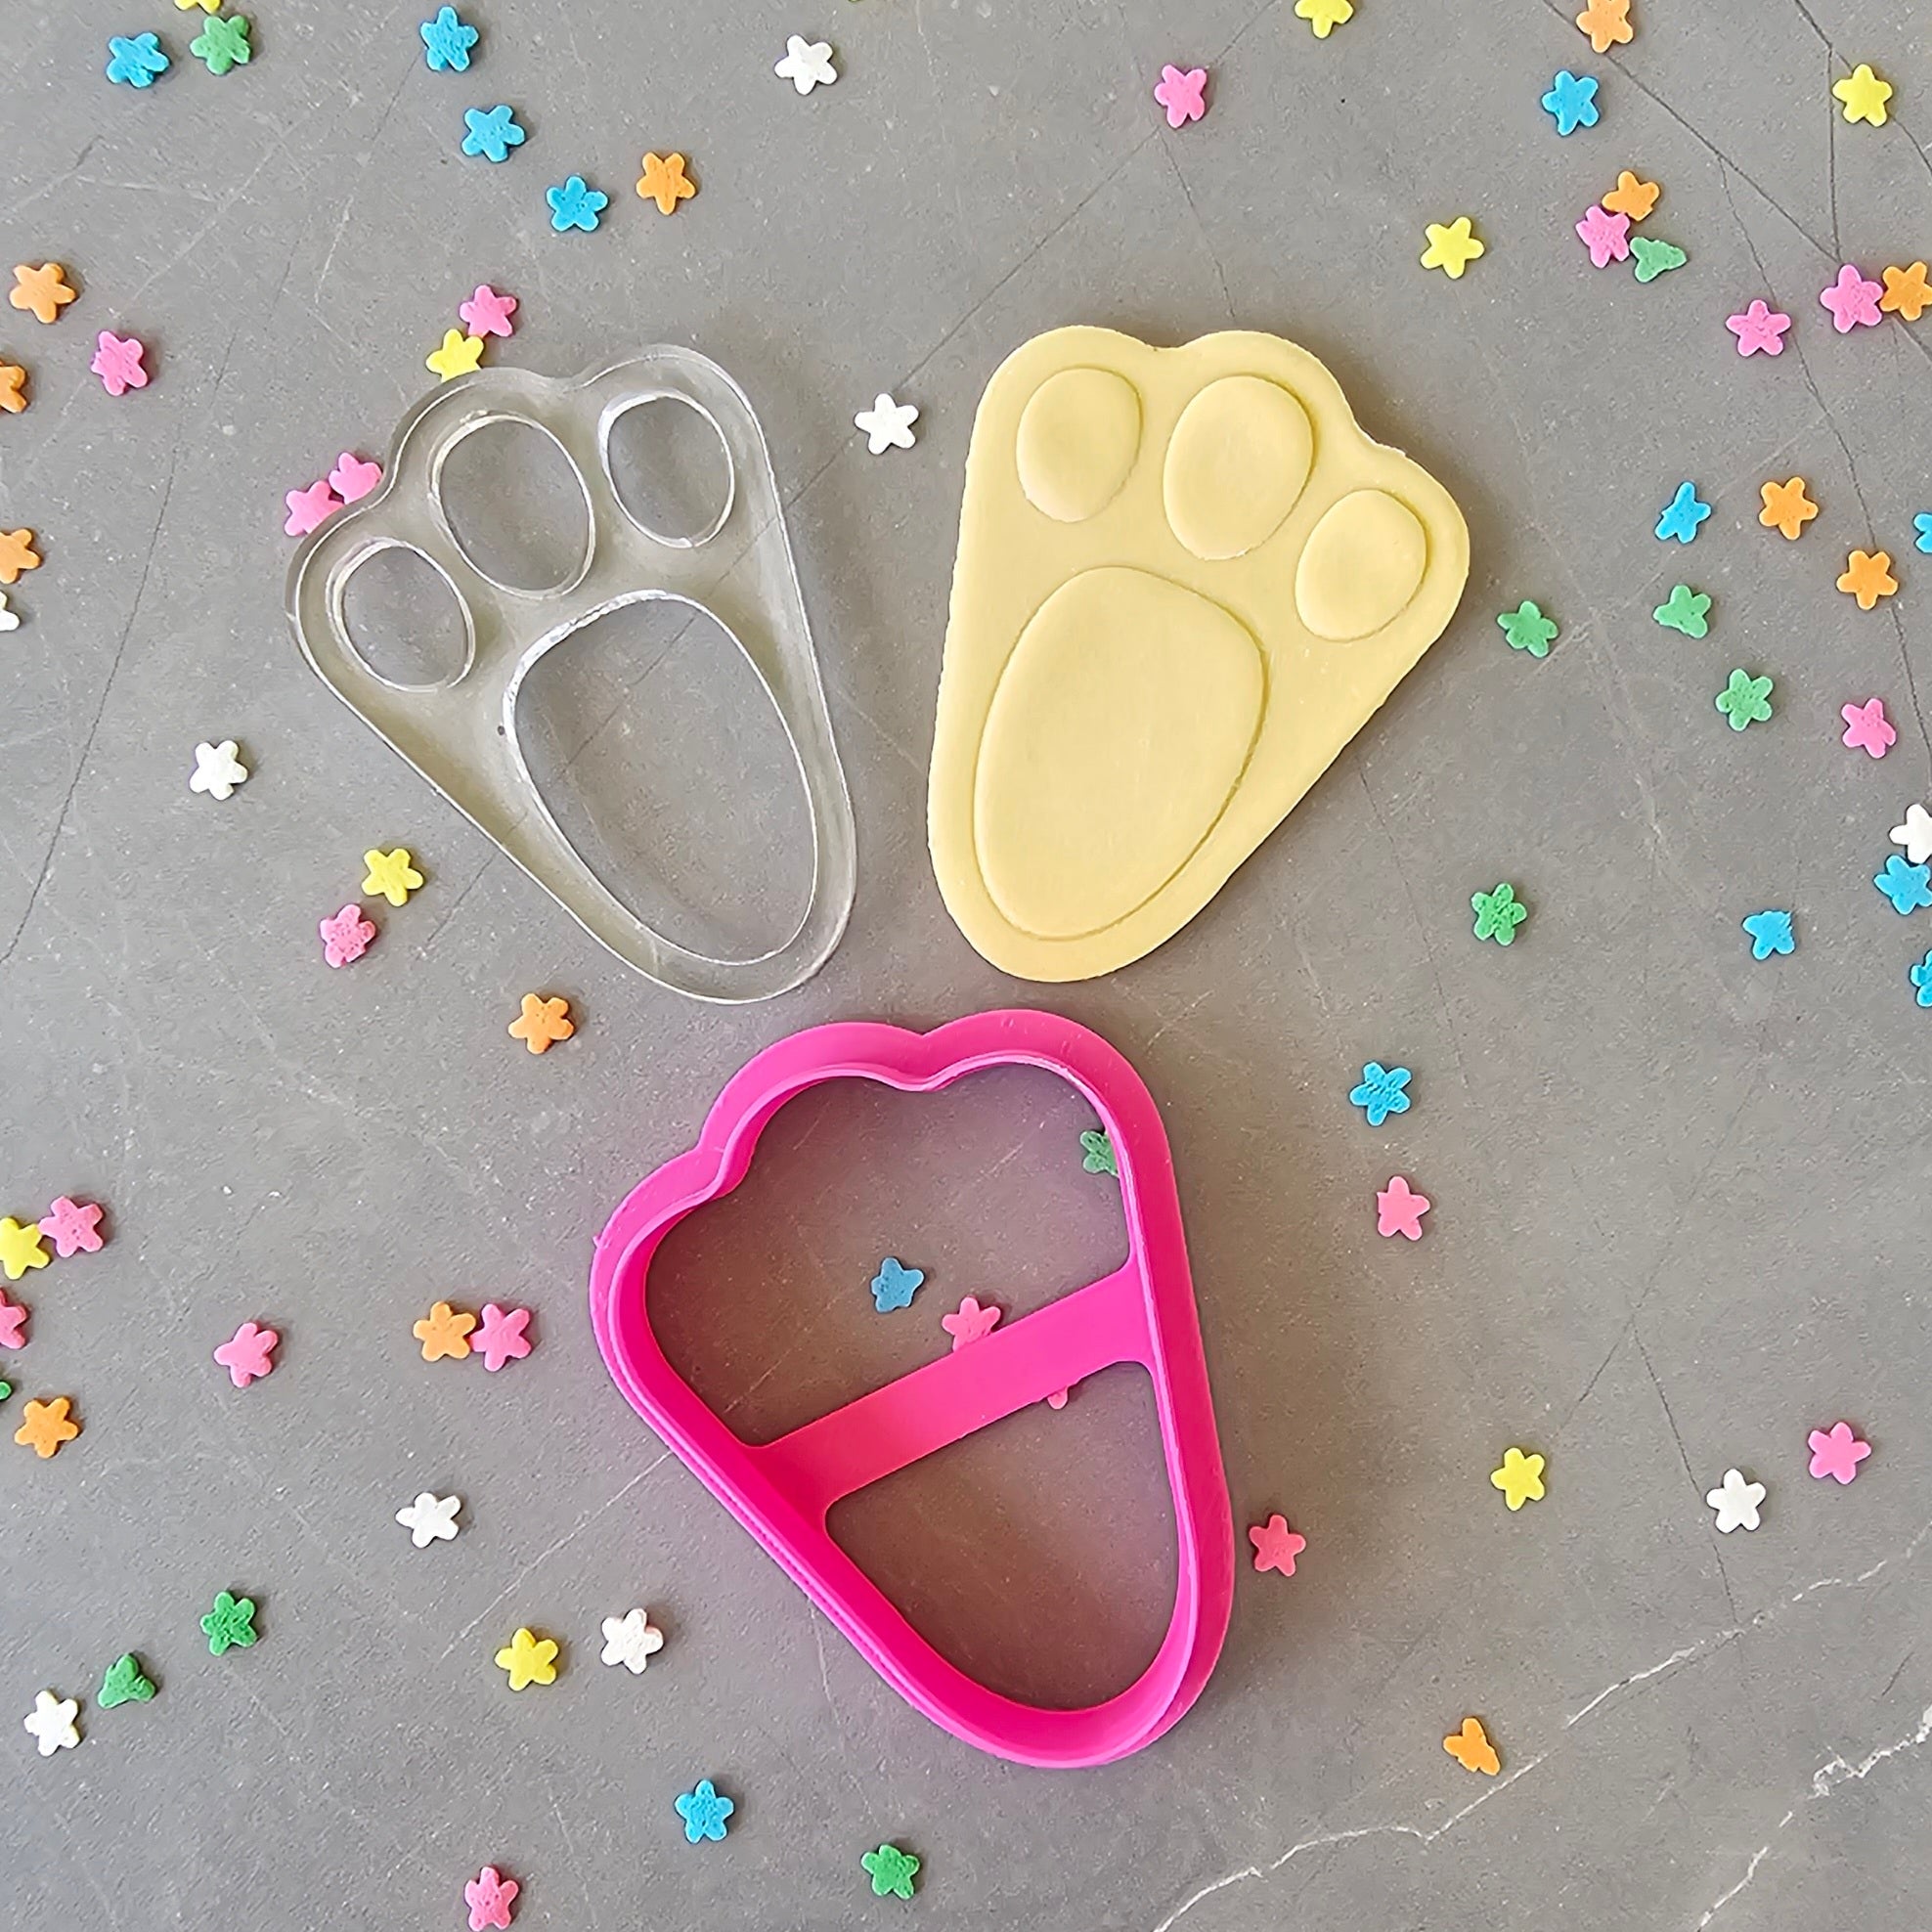 Bunny Paw Cookie Cutter & Stamp Set